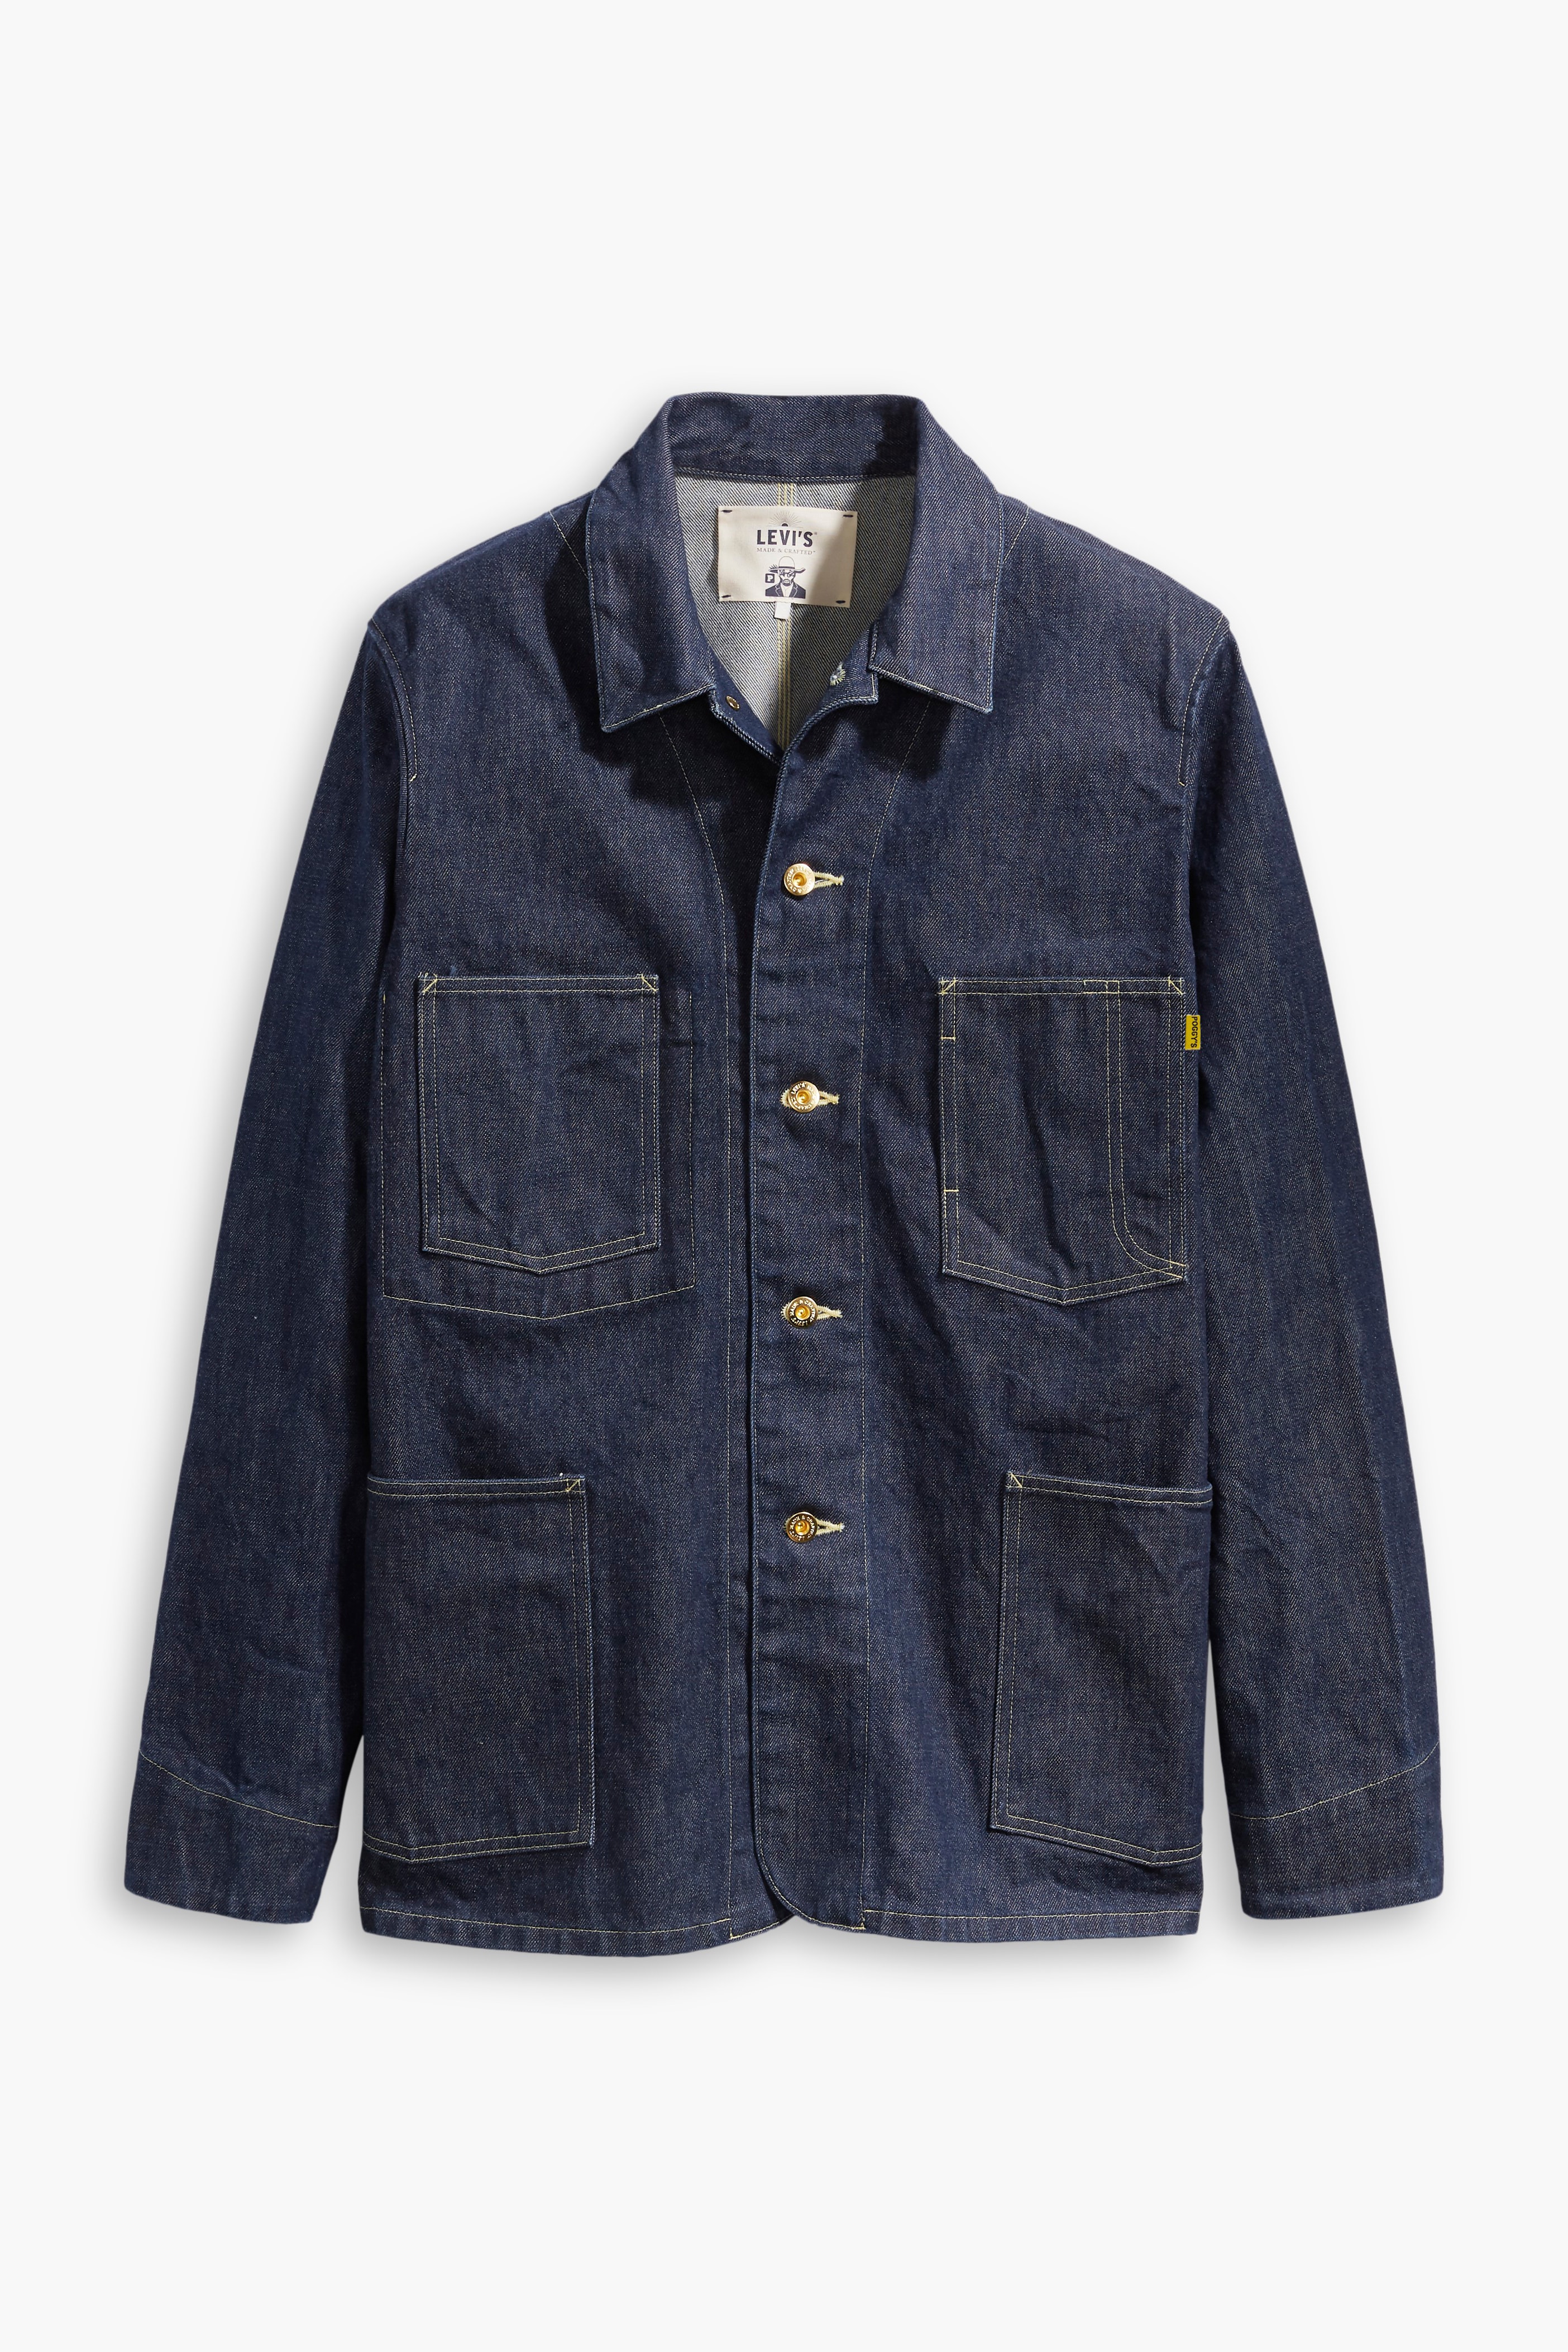 Poggy Levi's Fall Winter Capsule Collection